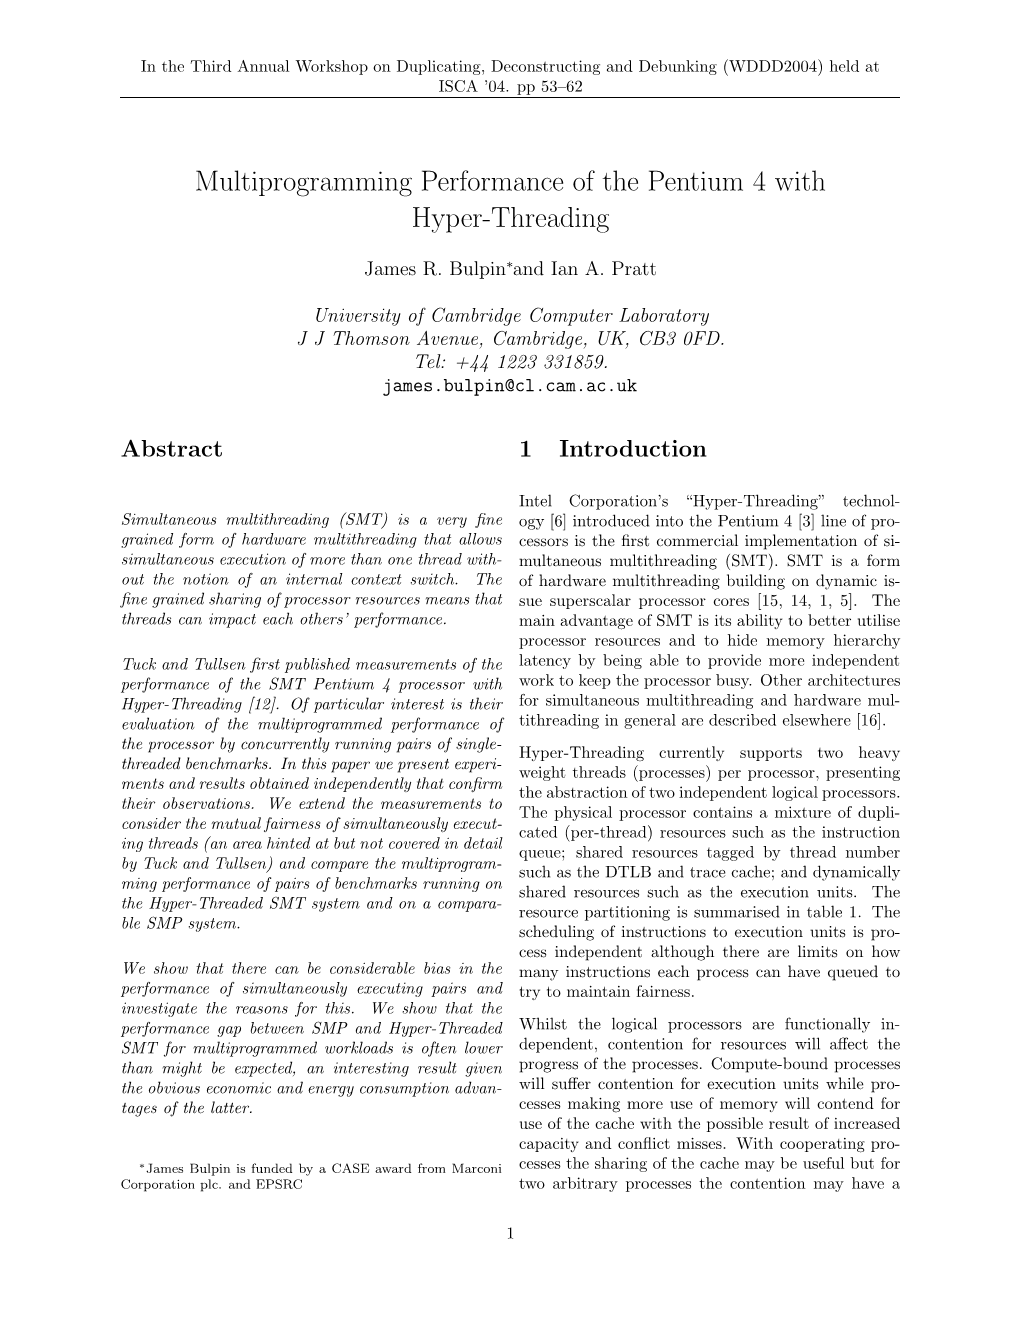 Multiprogramming Performance of the Pentium 4 with Hyper-Threading